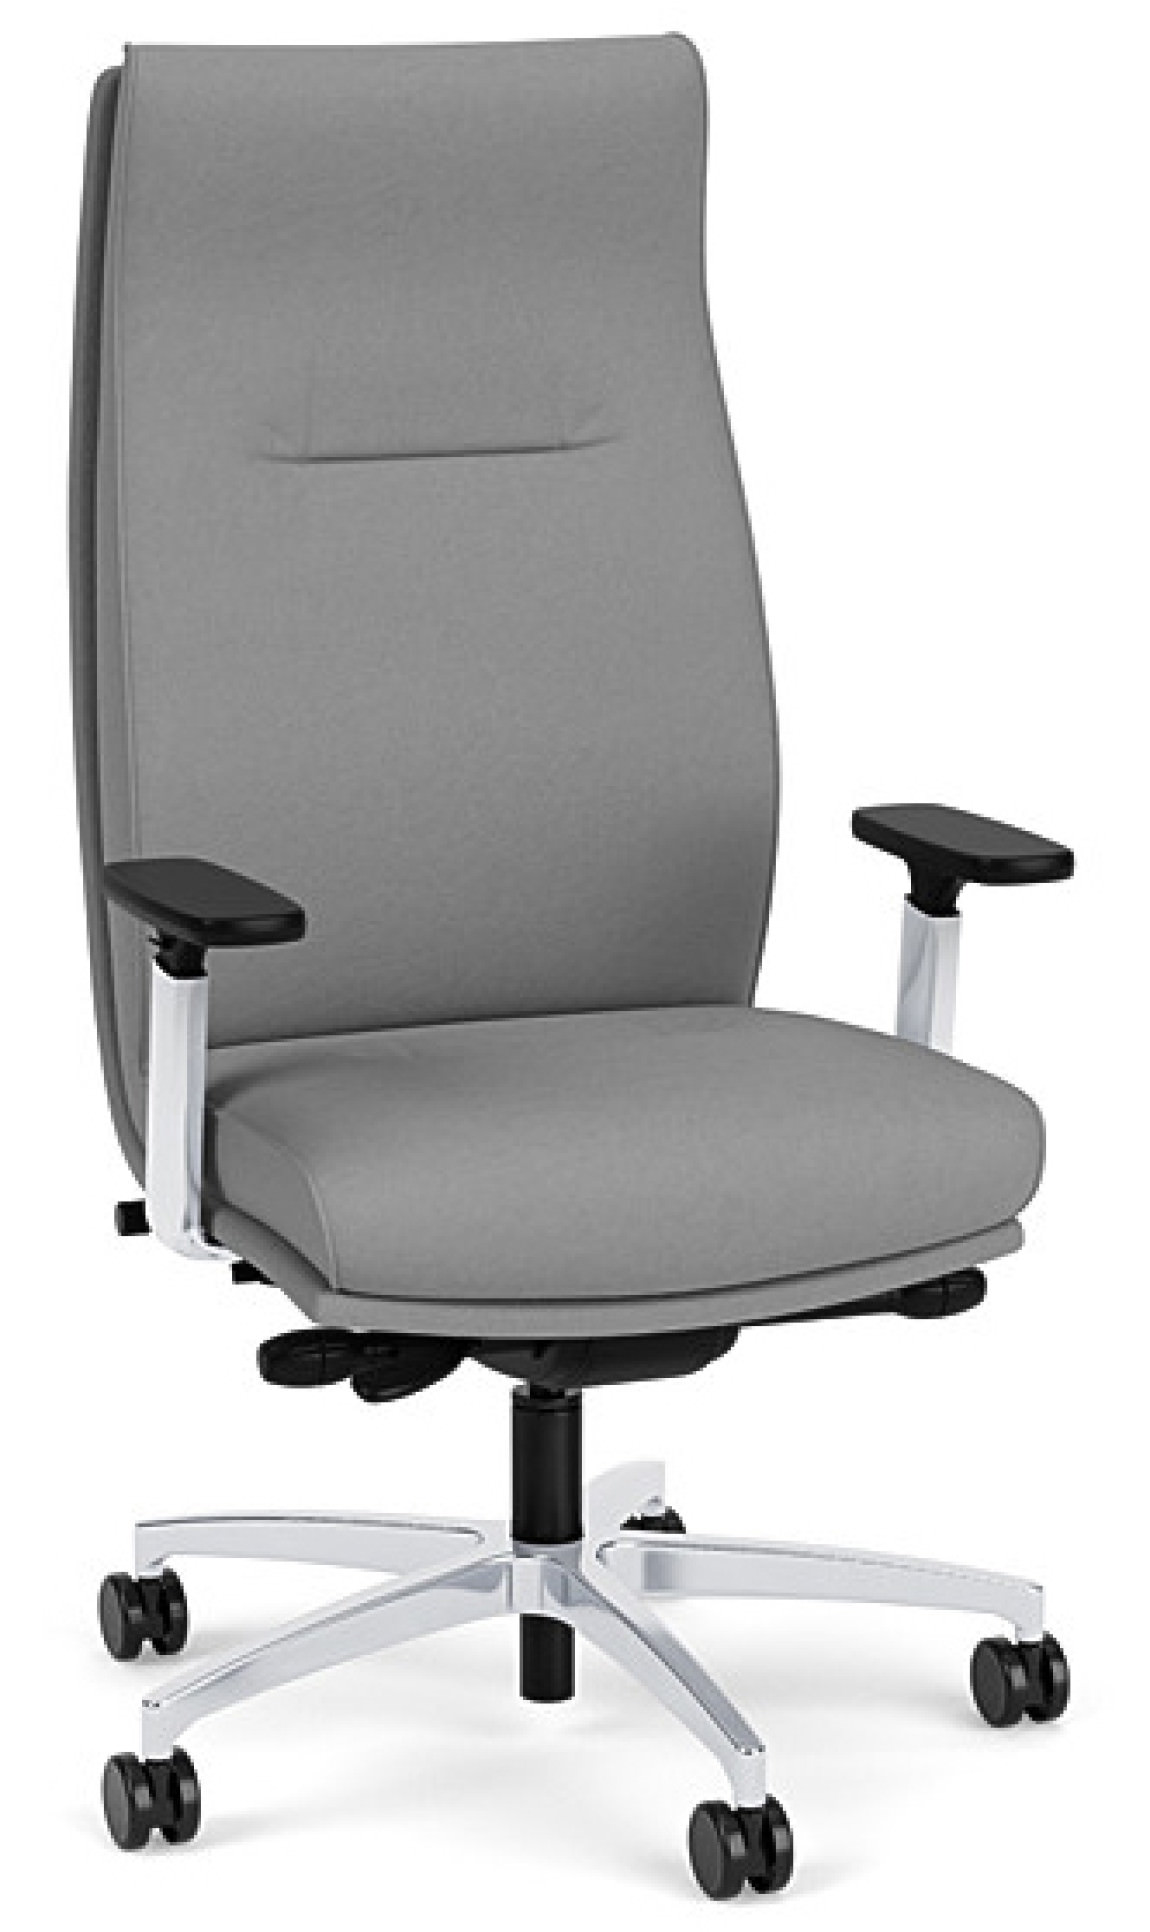 Leather Executive High Back Chair with Lumbar Support